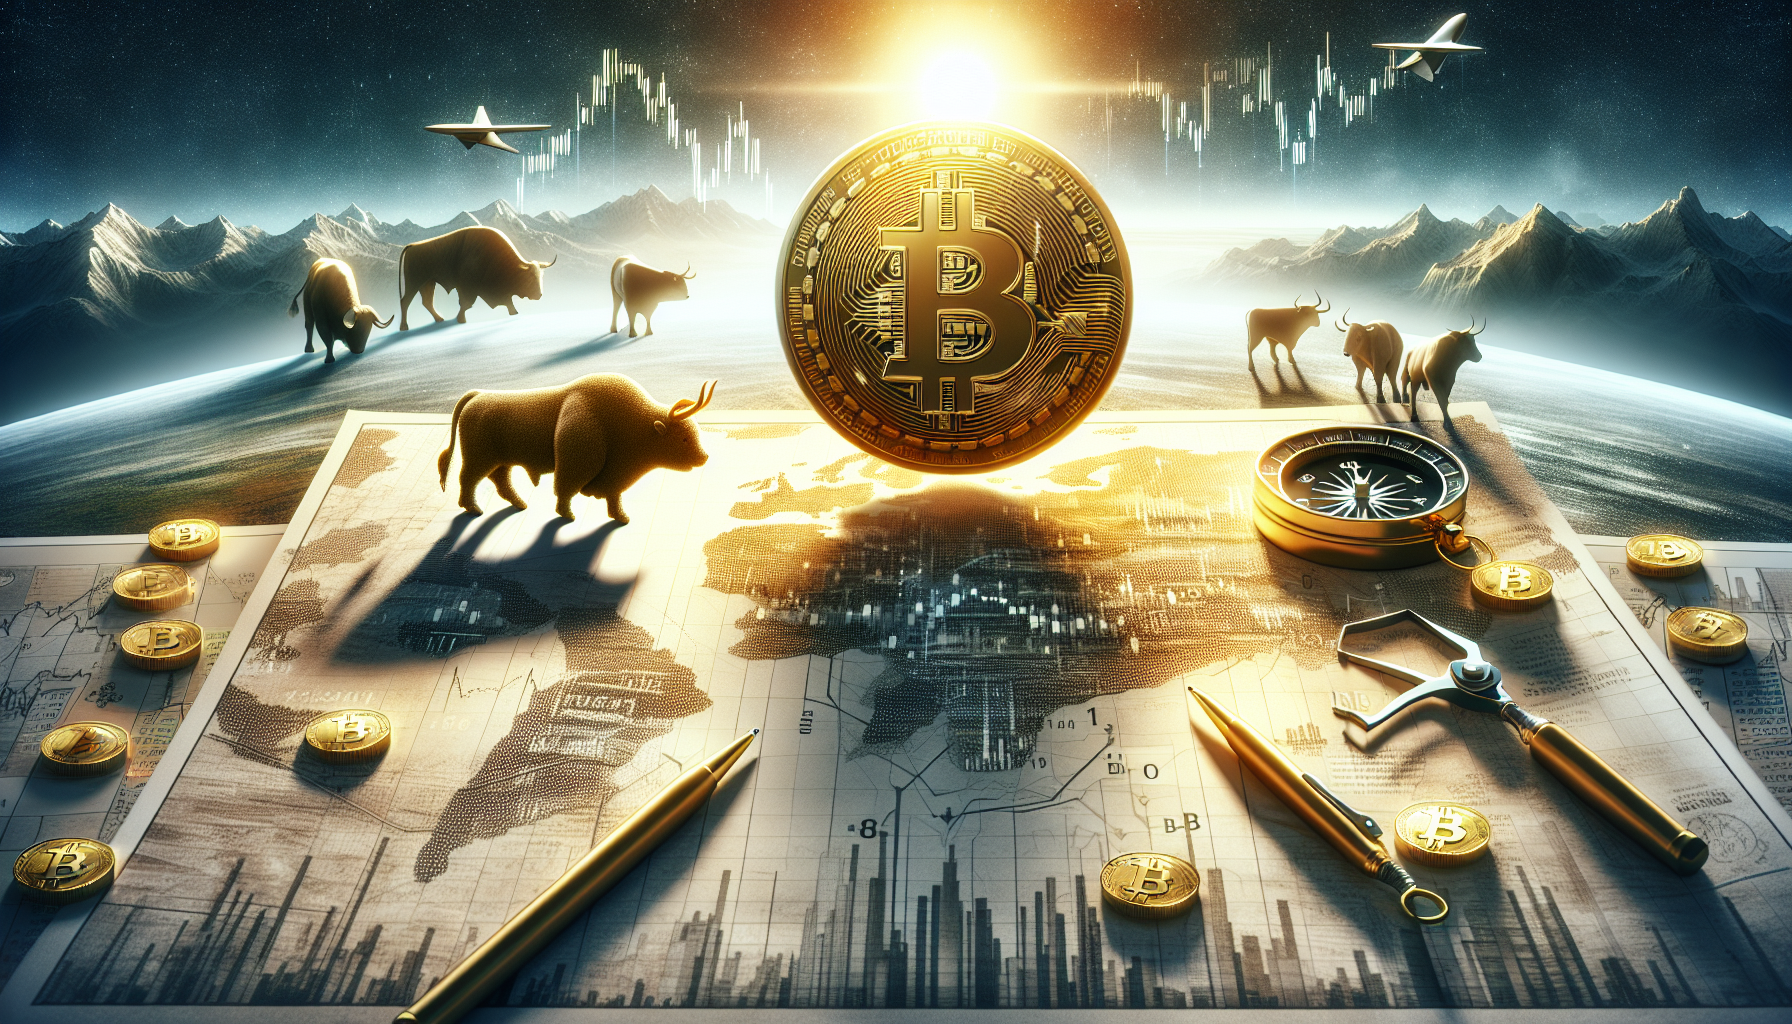 Bitcoin's resurgence navigating recent market trends amid price recovery